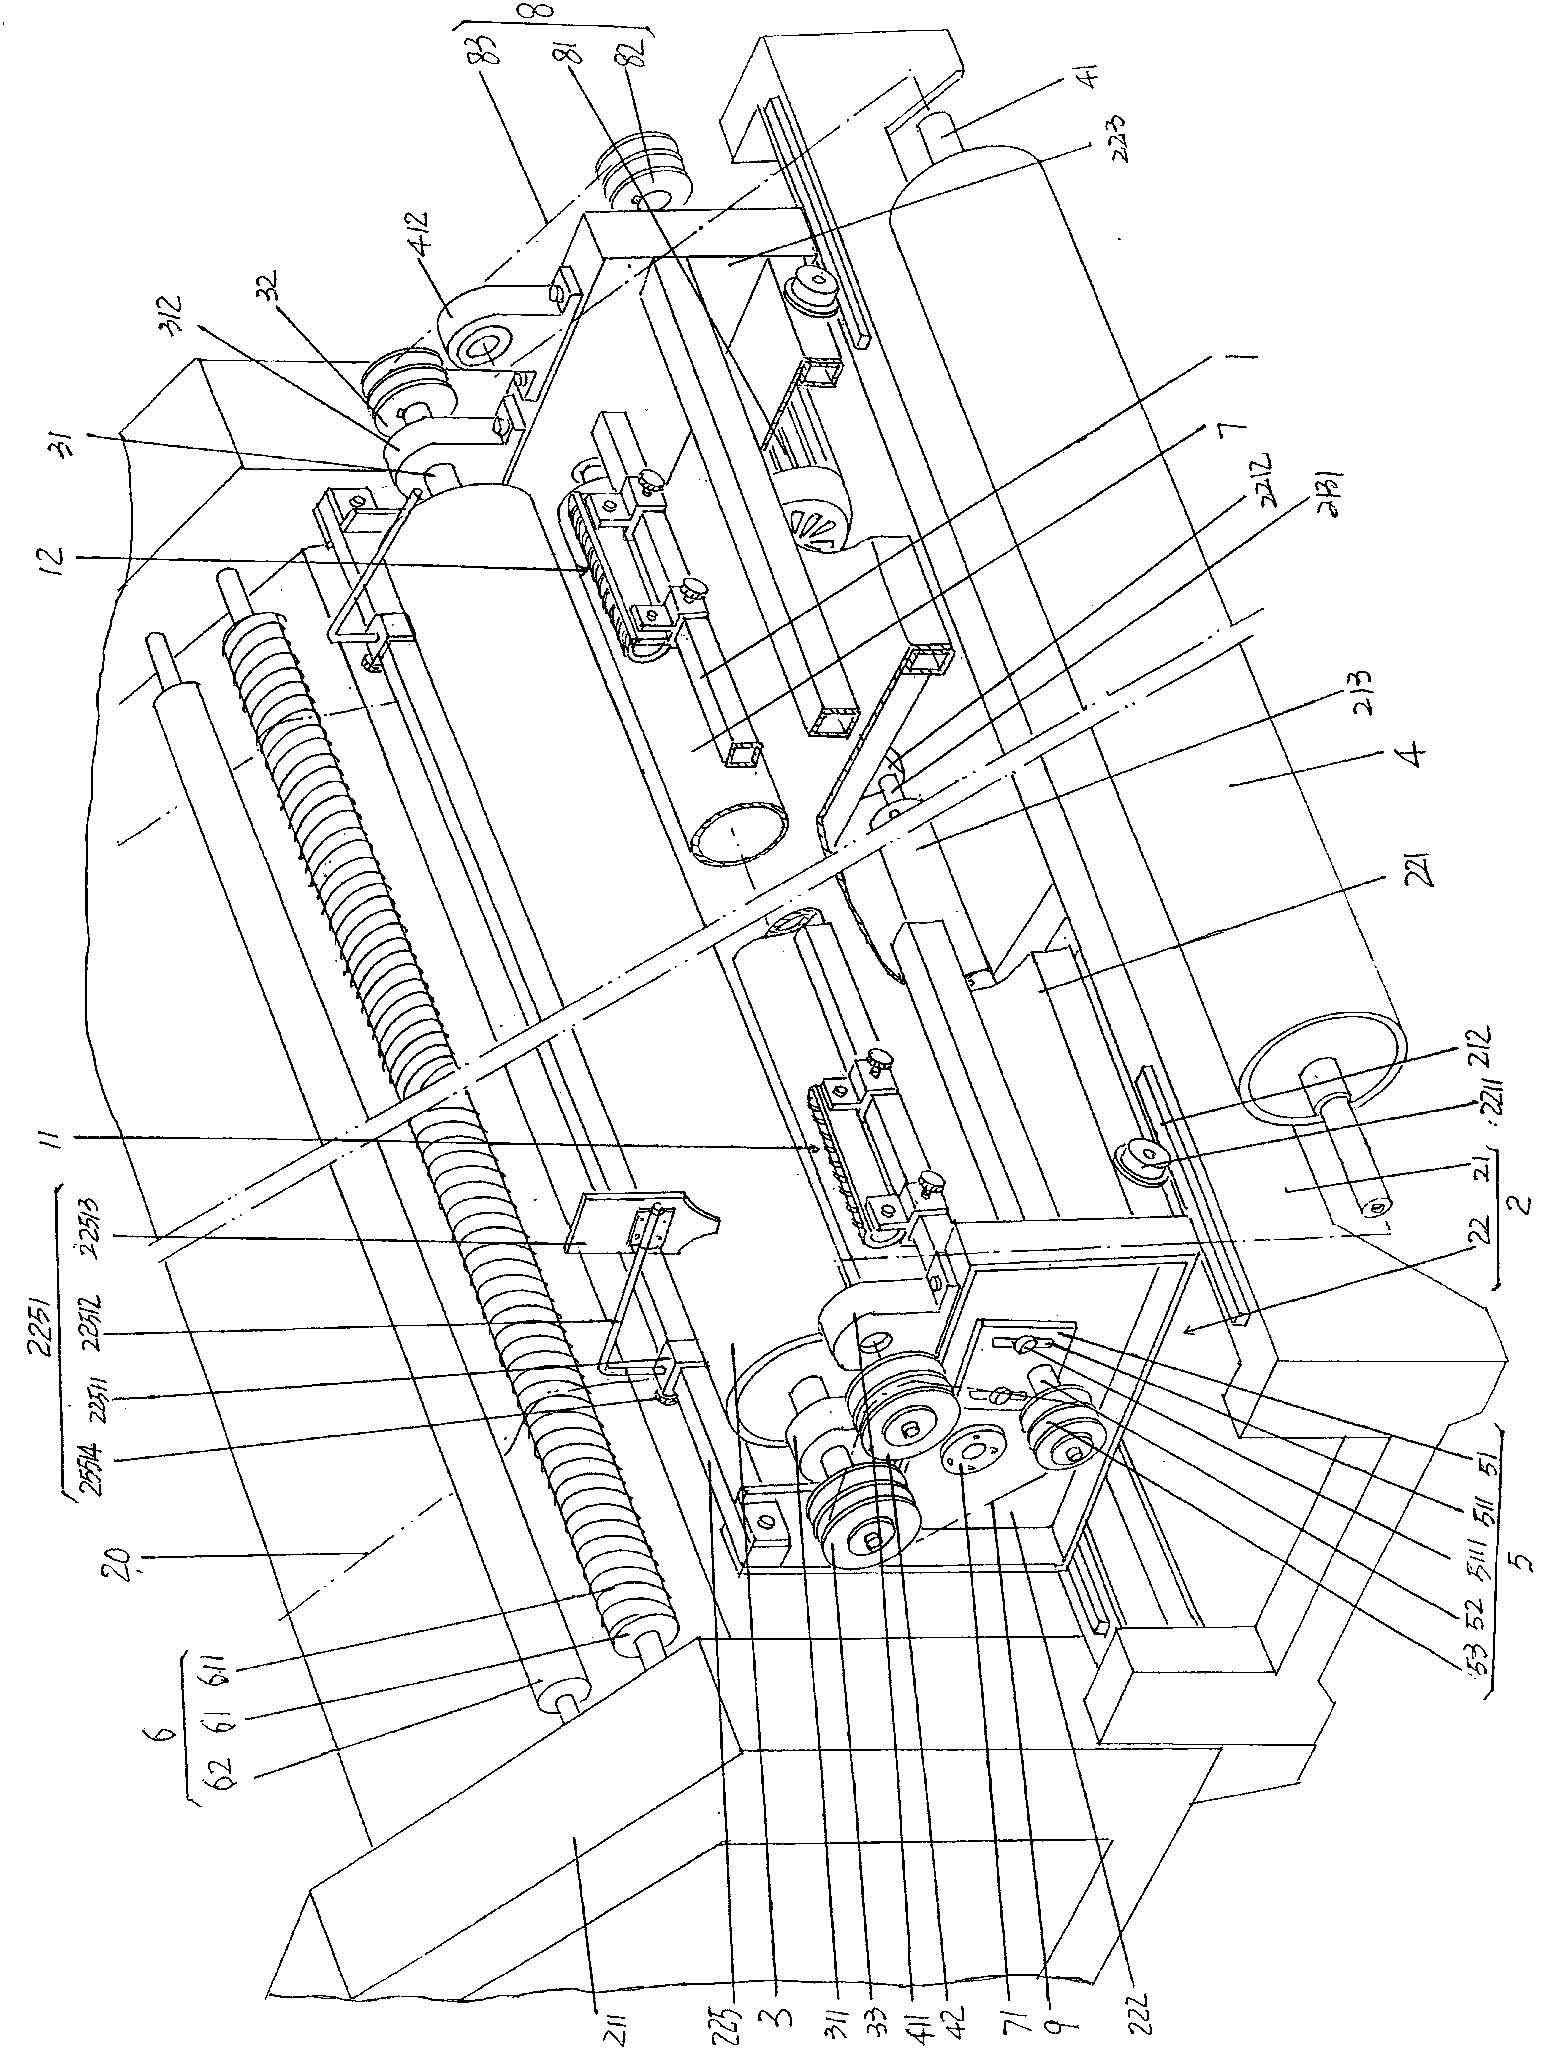 Edge peeling mechanism for knitwear rolling and inspecting machine